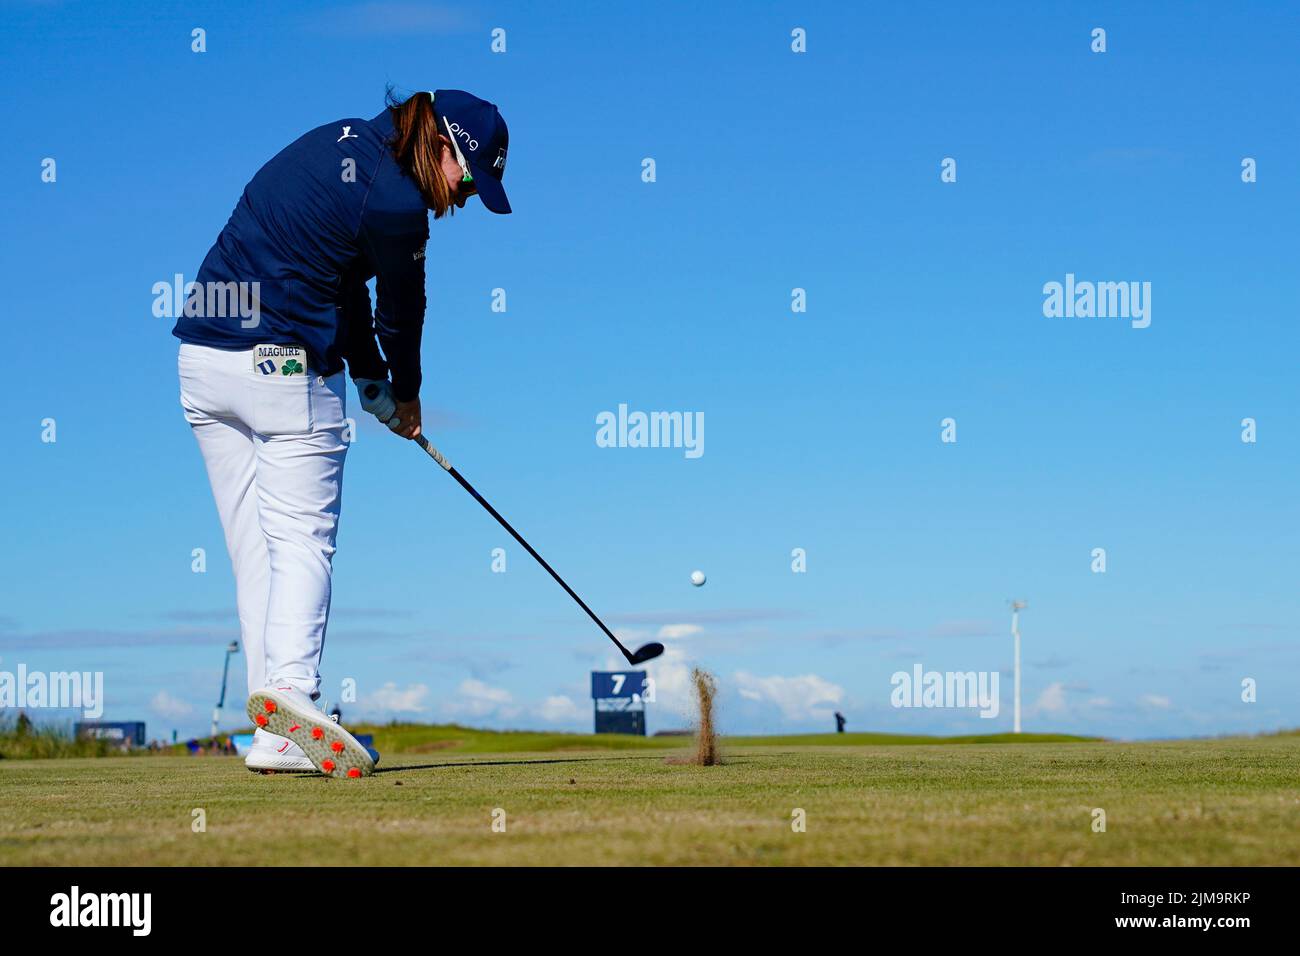 Gullane, Scotland, UK. 5th August 2022. Second round of the AIG Women’s Open golf championship at Muirfield in East Lothian. Pic; Leona Maguire plays tee shot on 7th hole.  Iain Masterton/Alamy Live News Stock Photo